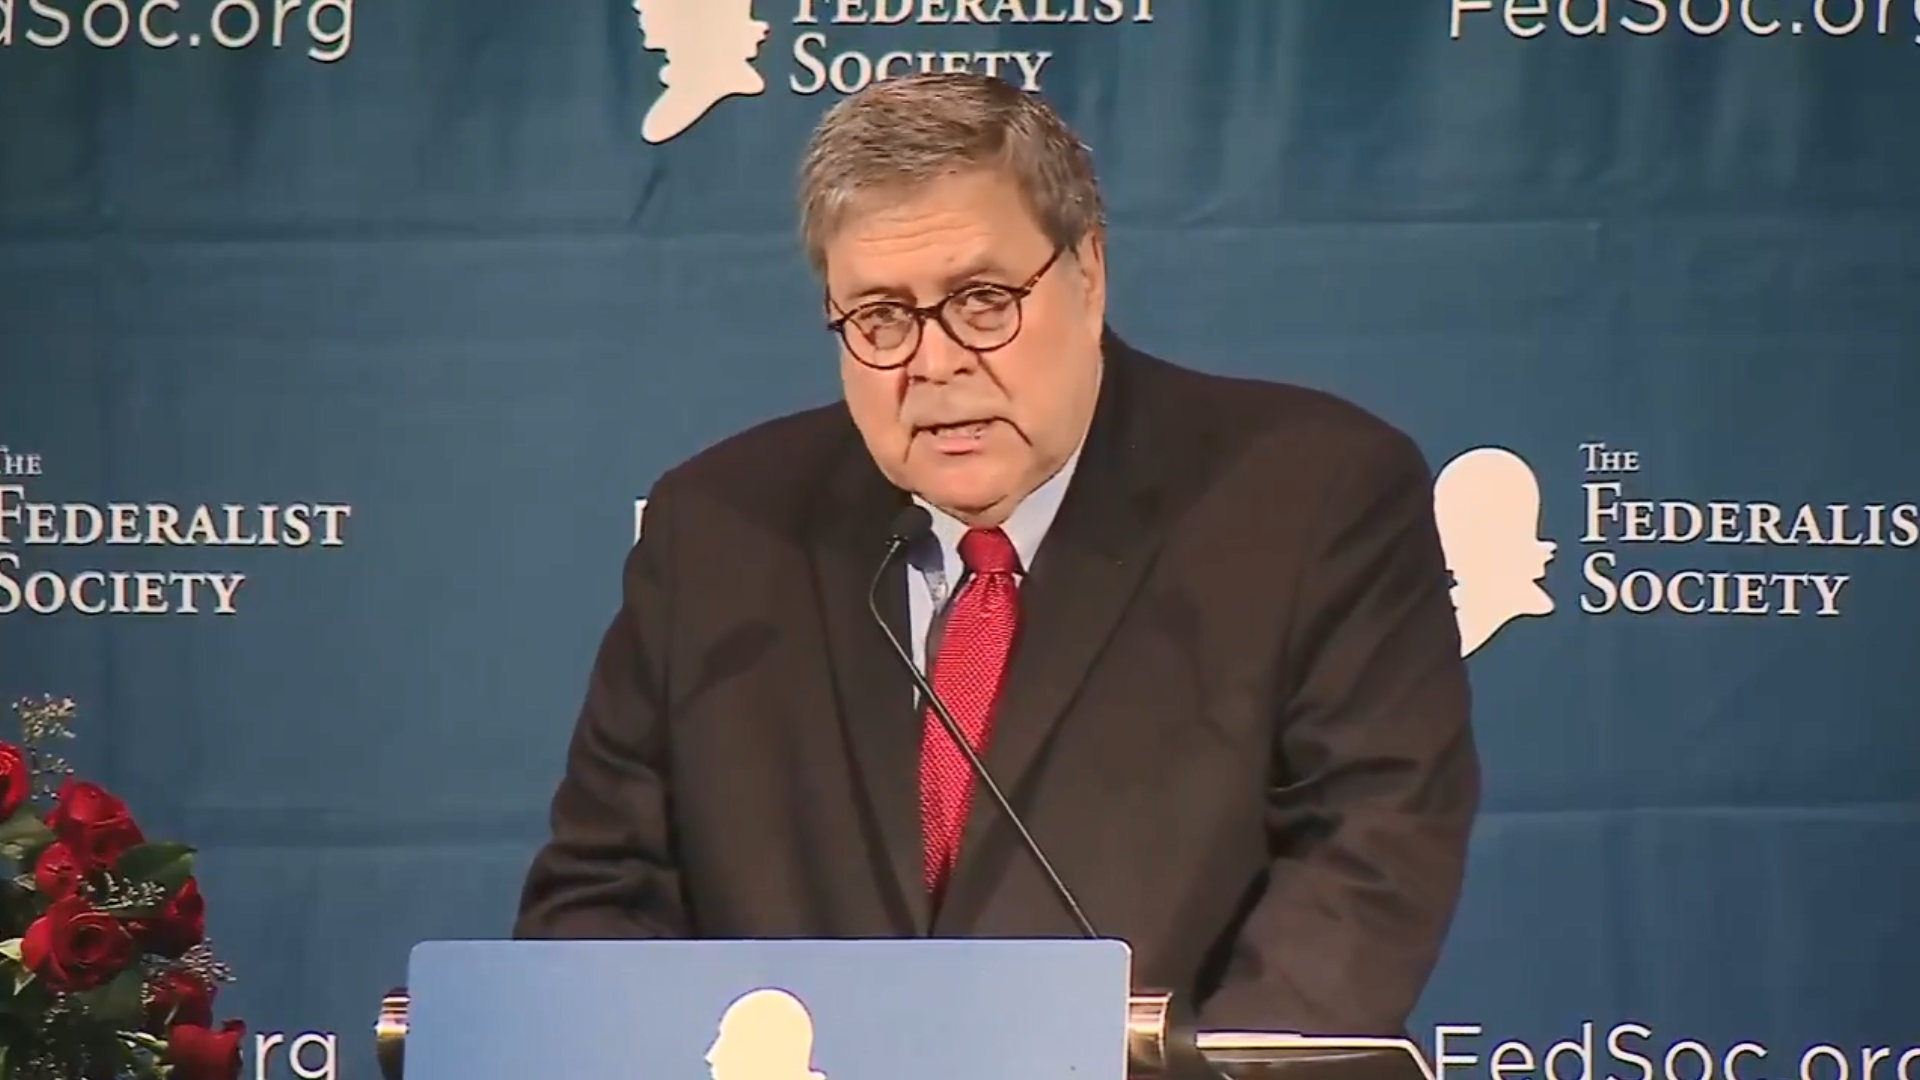 Bill Barr Accuses Dems Of Sabotaging Trump From Day 1, Trying To “Cripple Duly Elected Government” - MAGA Daily Report